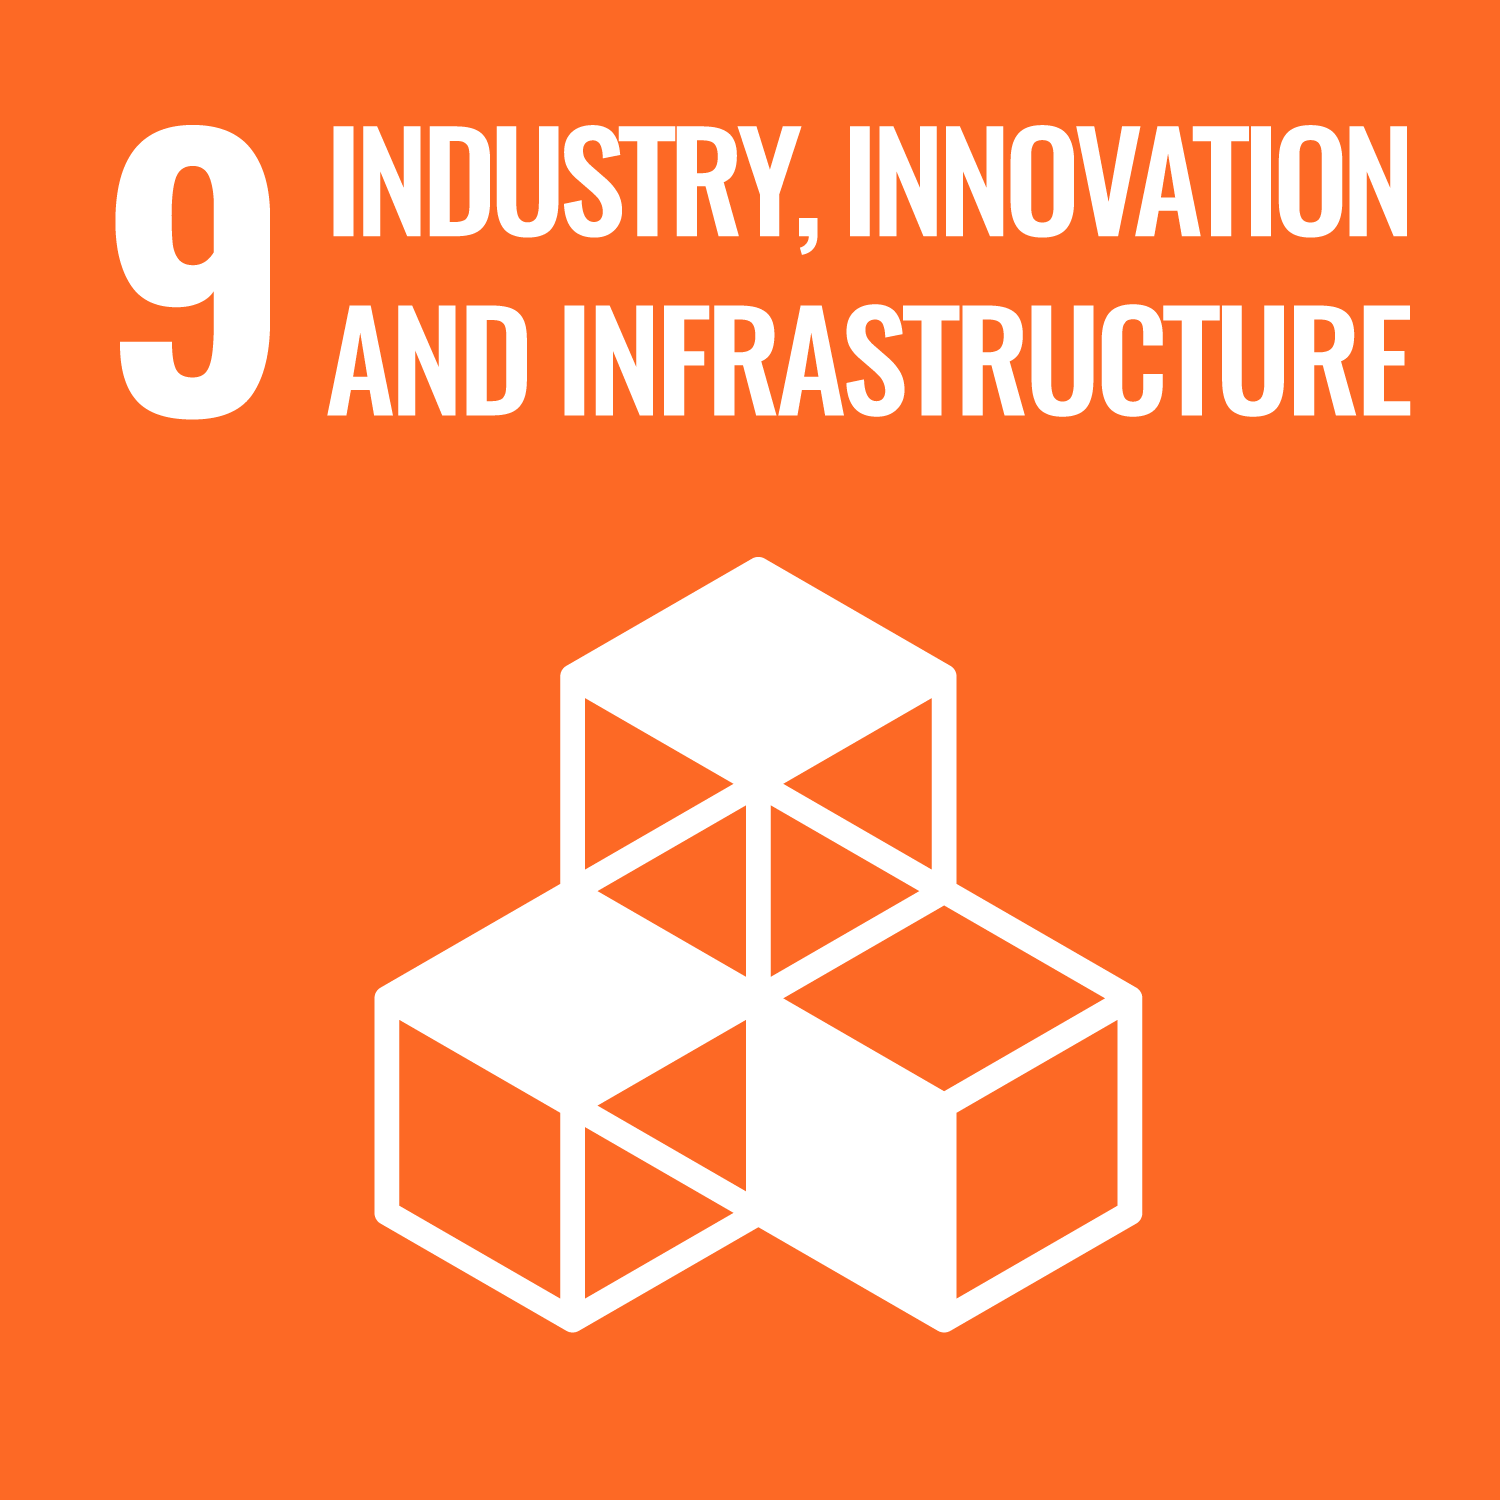 SDG 9 – Industry, Innovation and Infrastructure